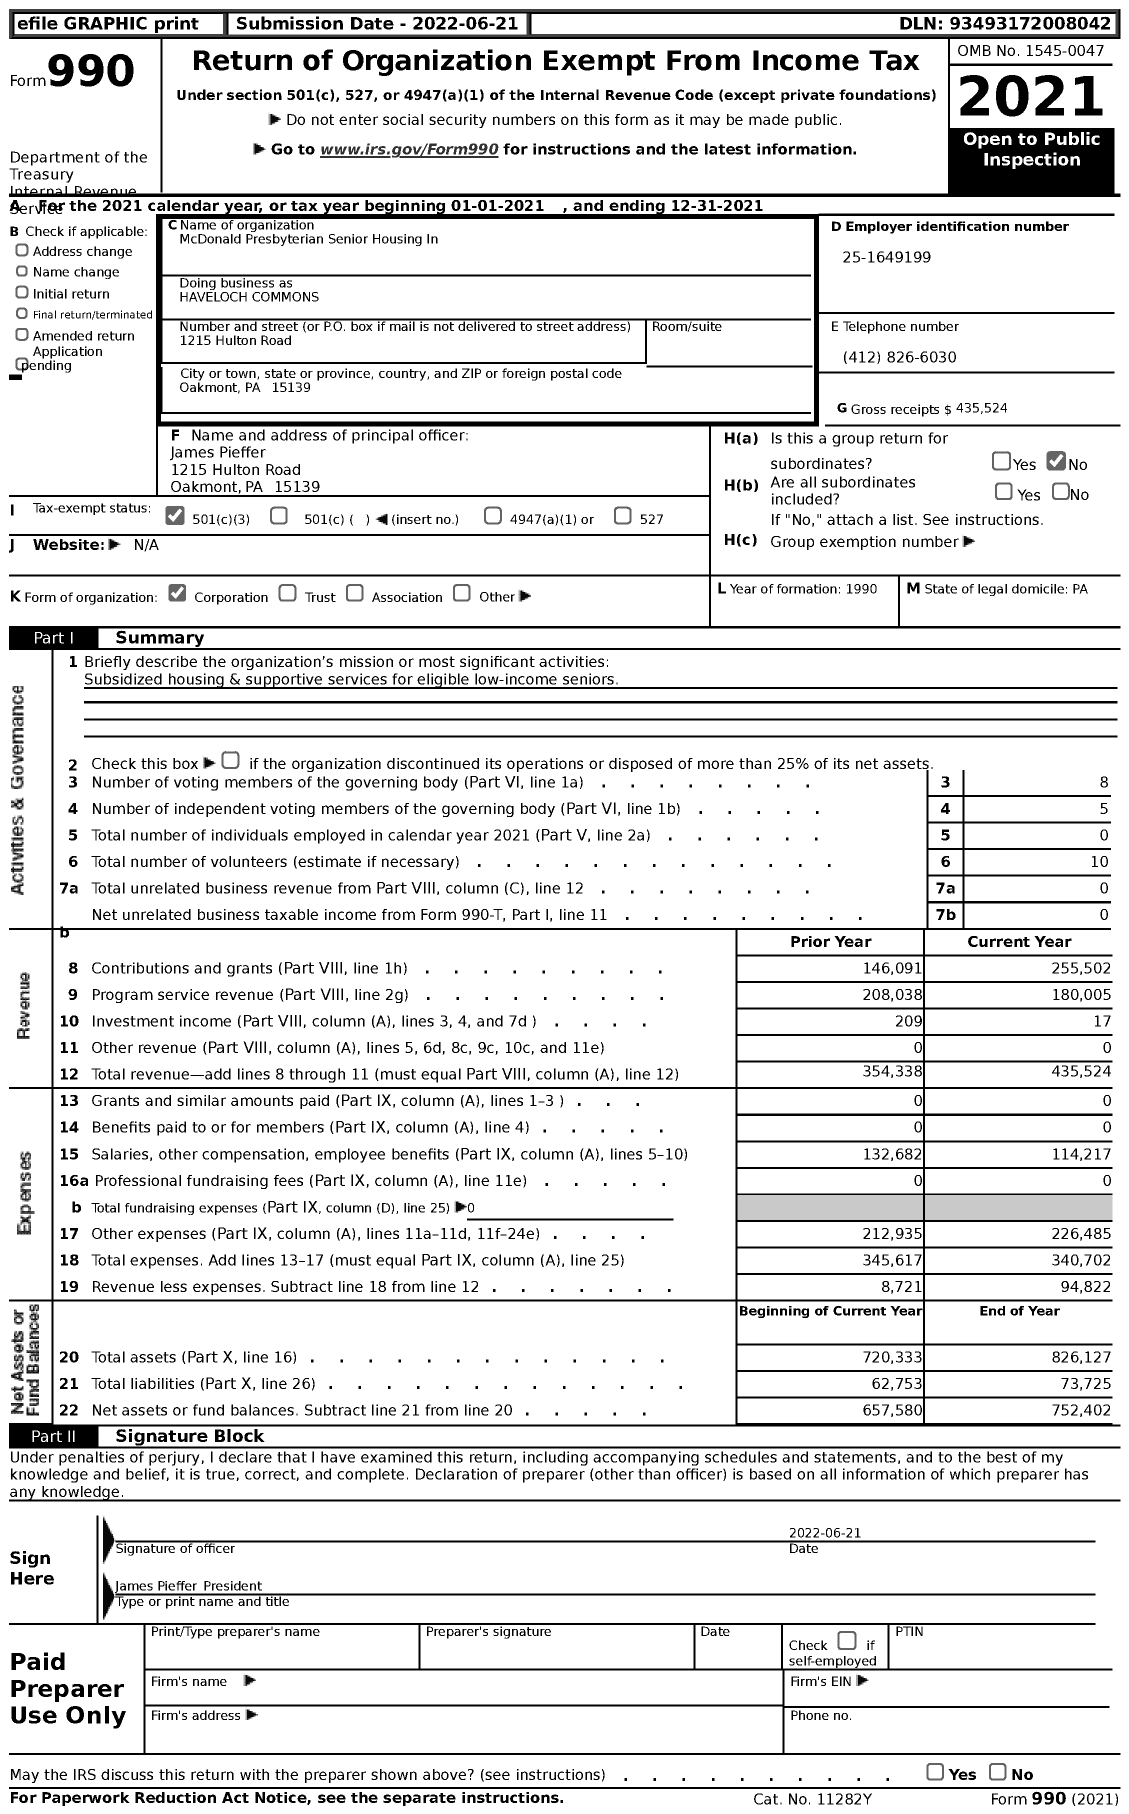 Image of first page of 2021 Form 990 for Haveloch Commons